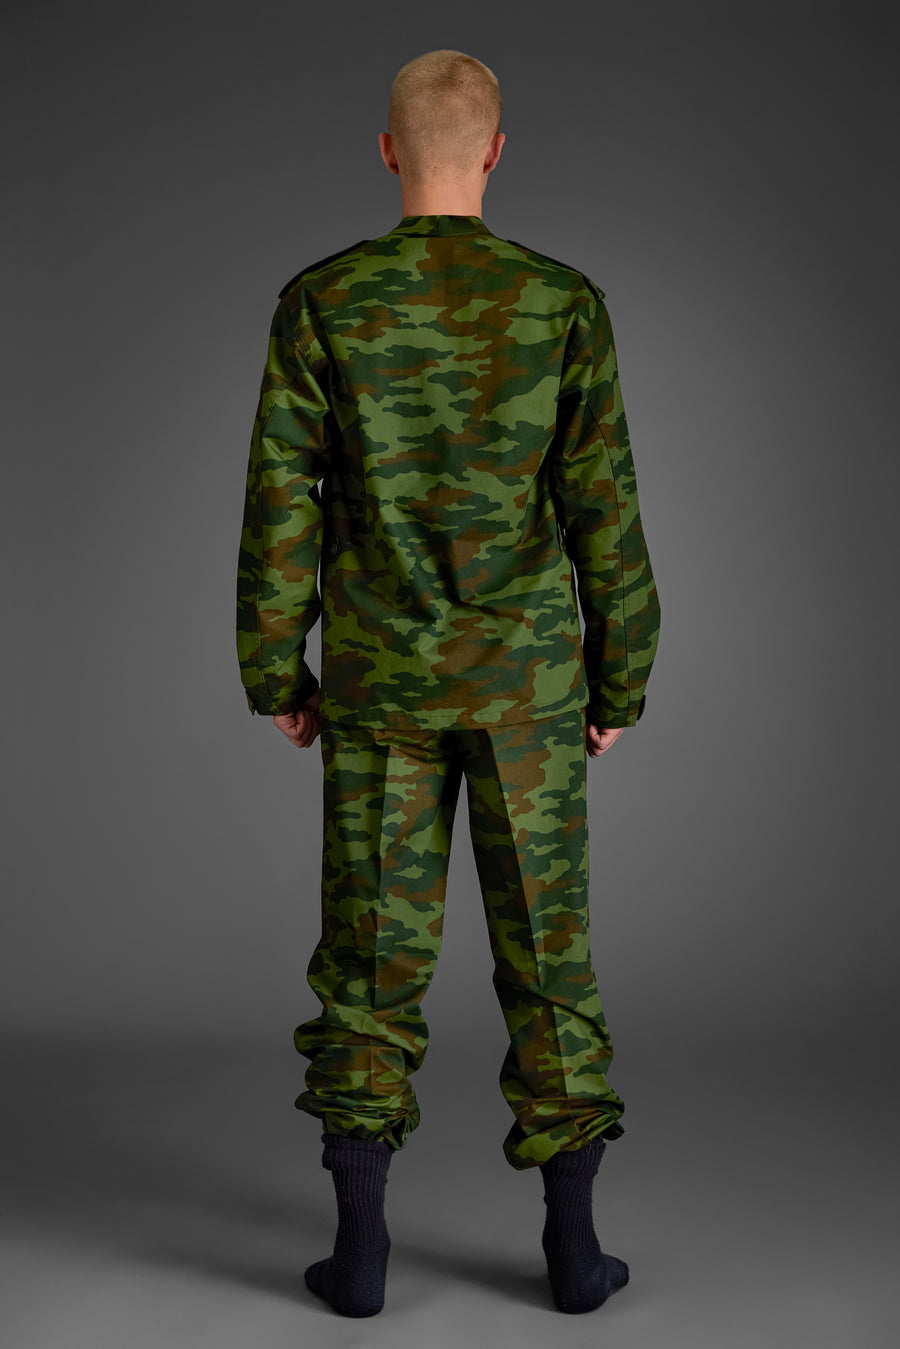 Green Camouflage BDU designed for land forces